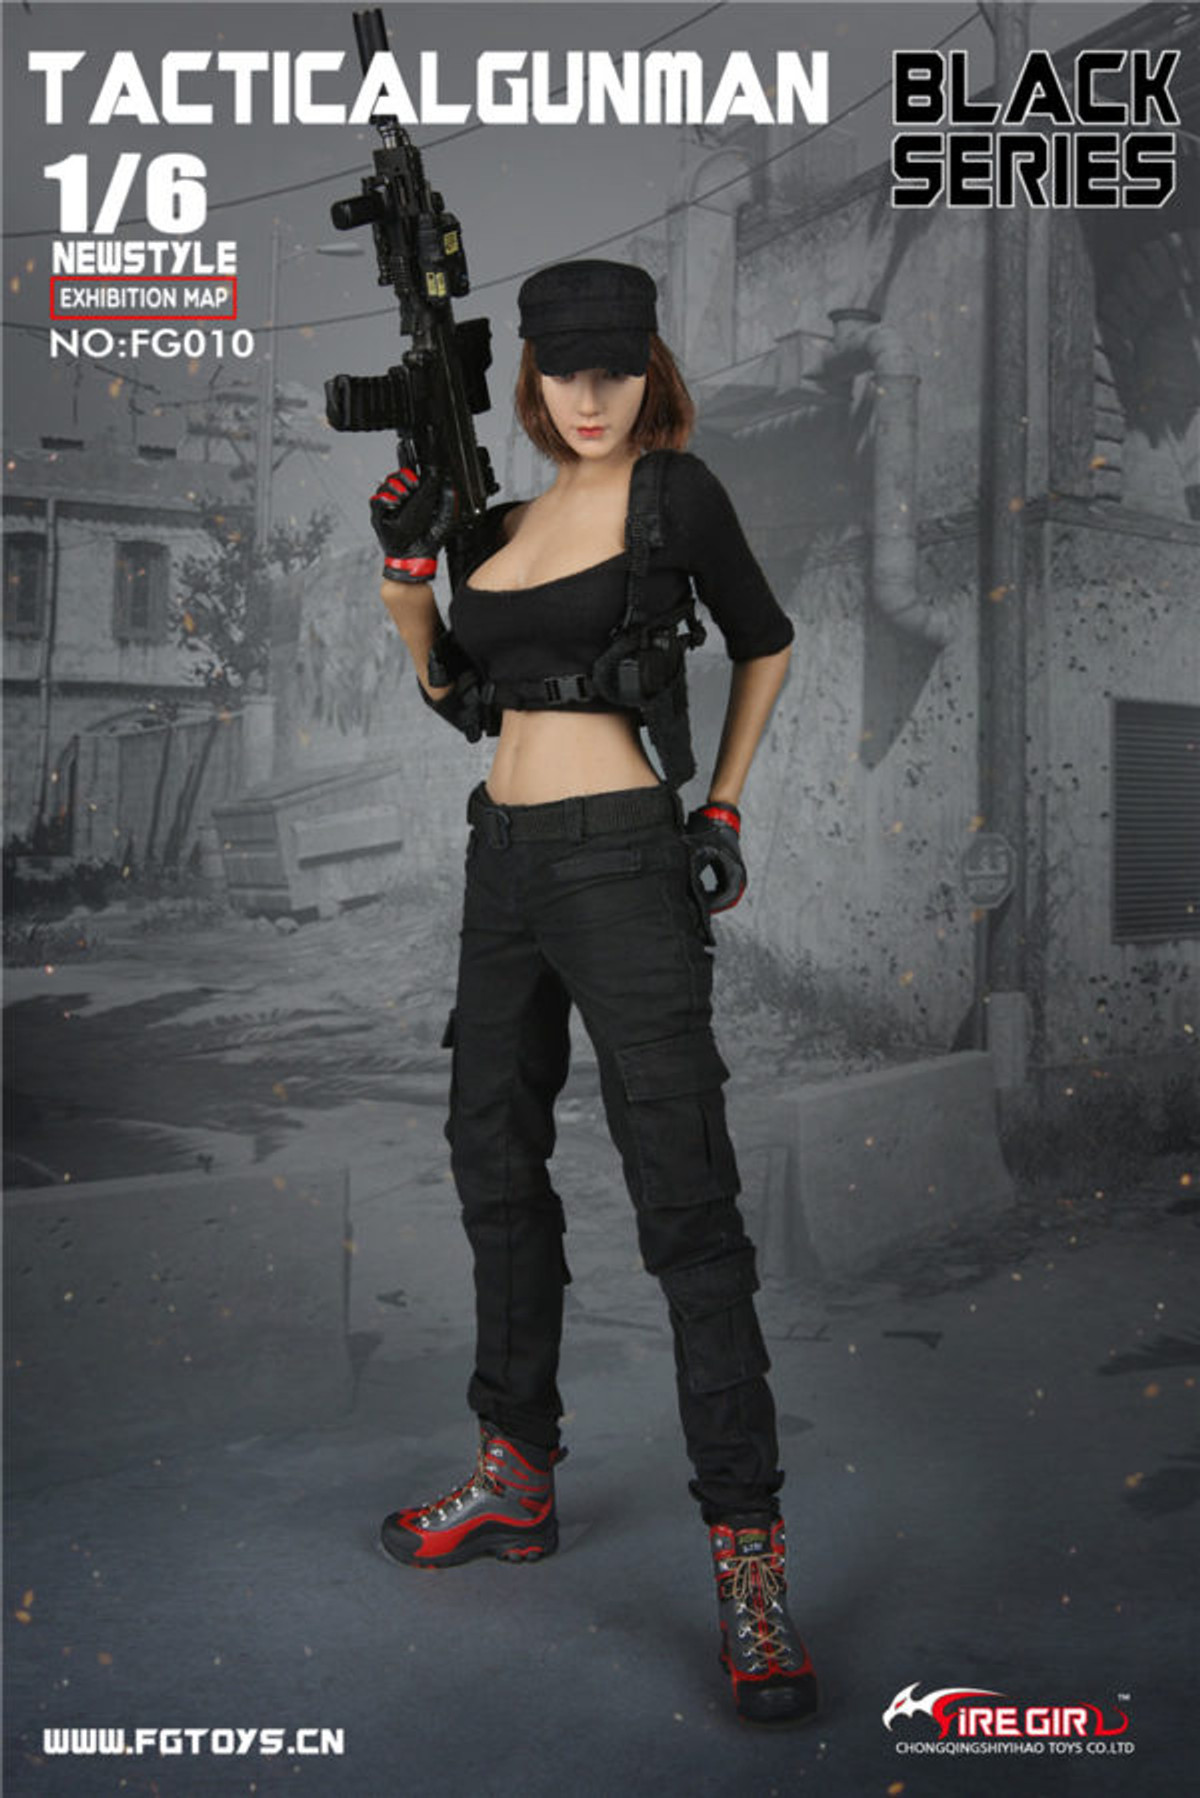 Fire Girl Toys - Female Tactical Shooter Combat Uniform